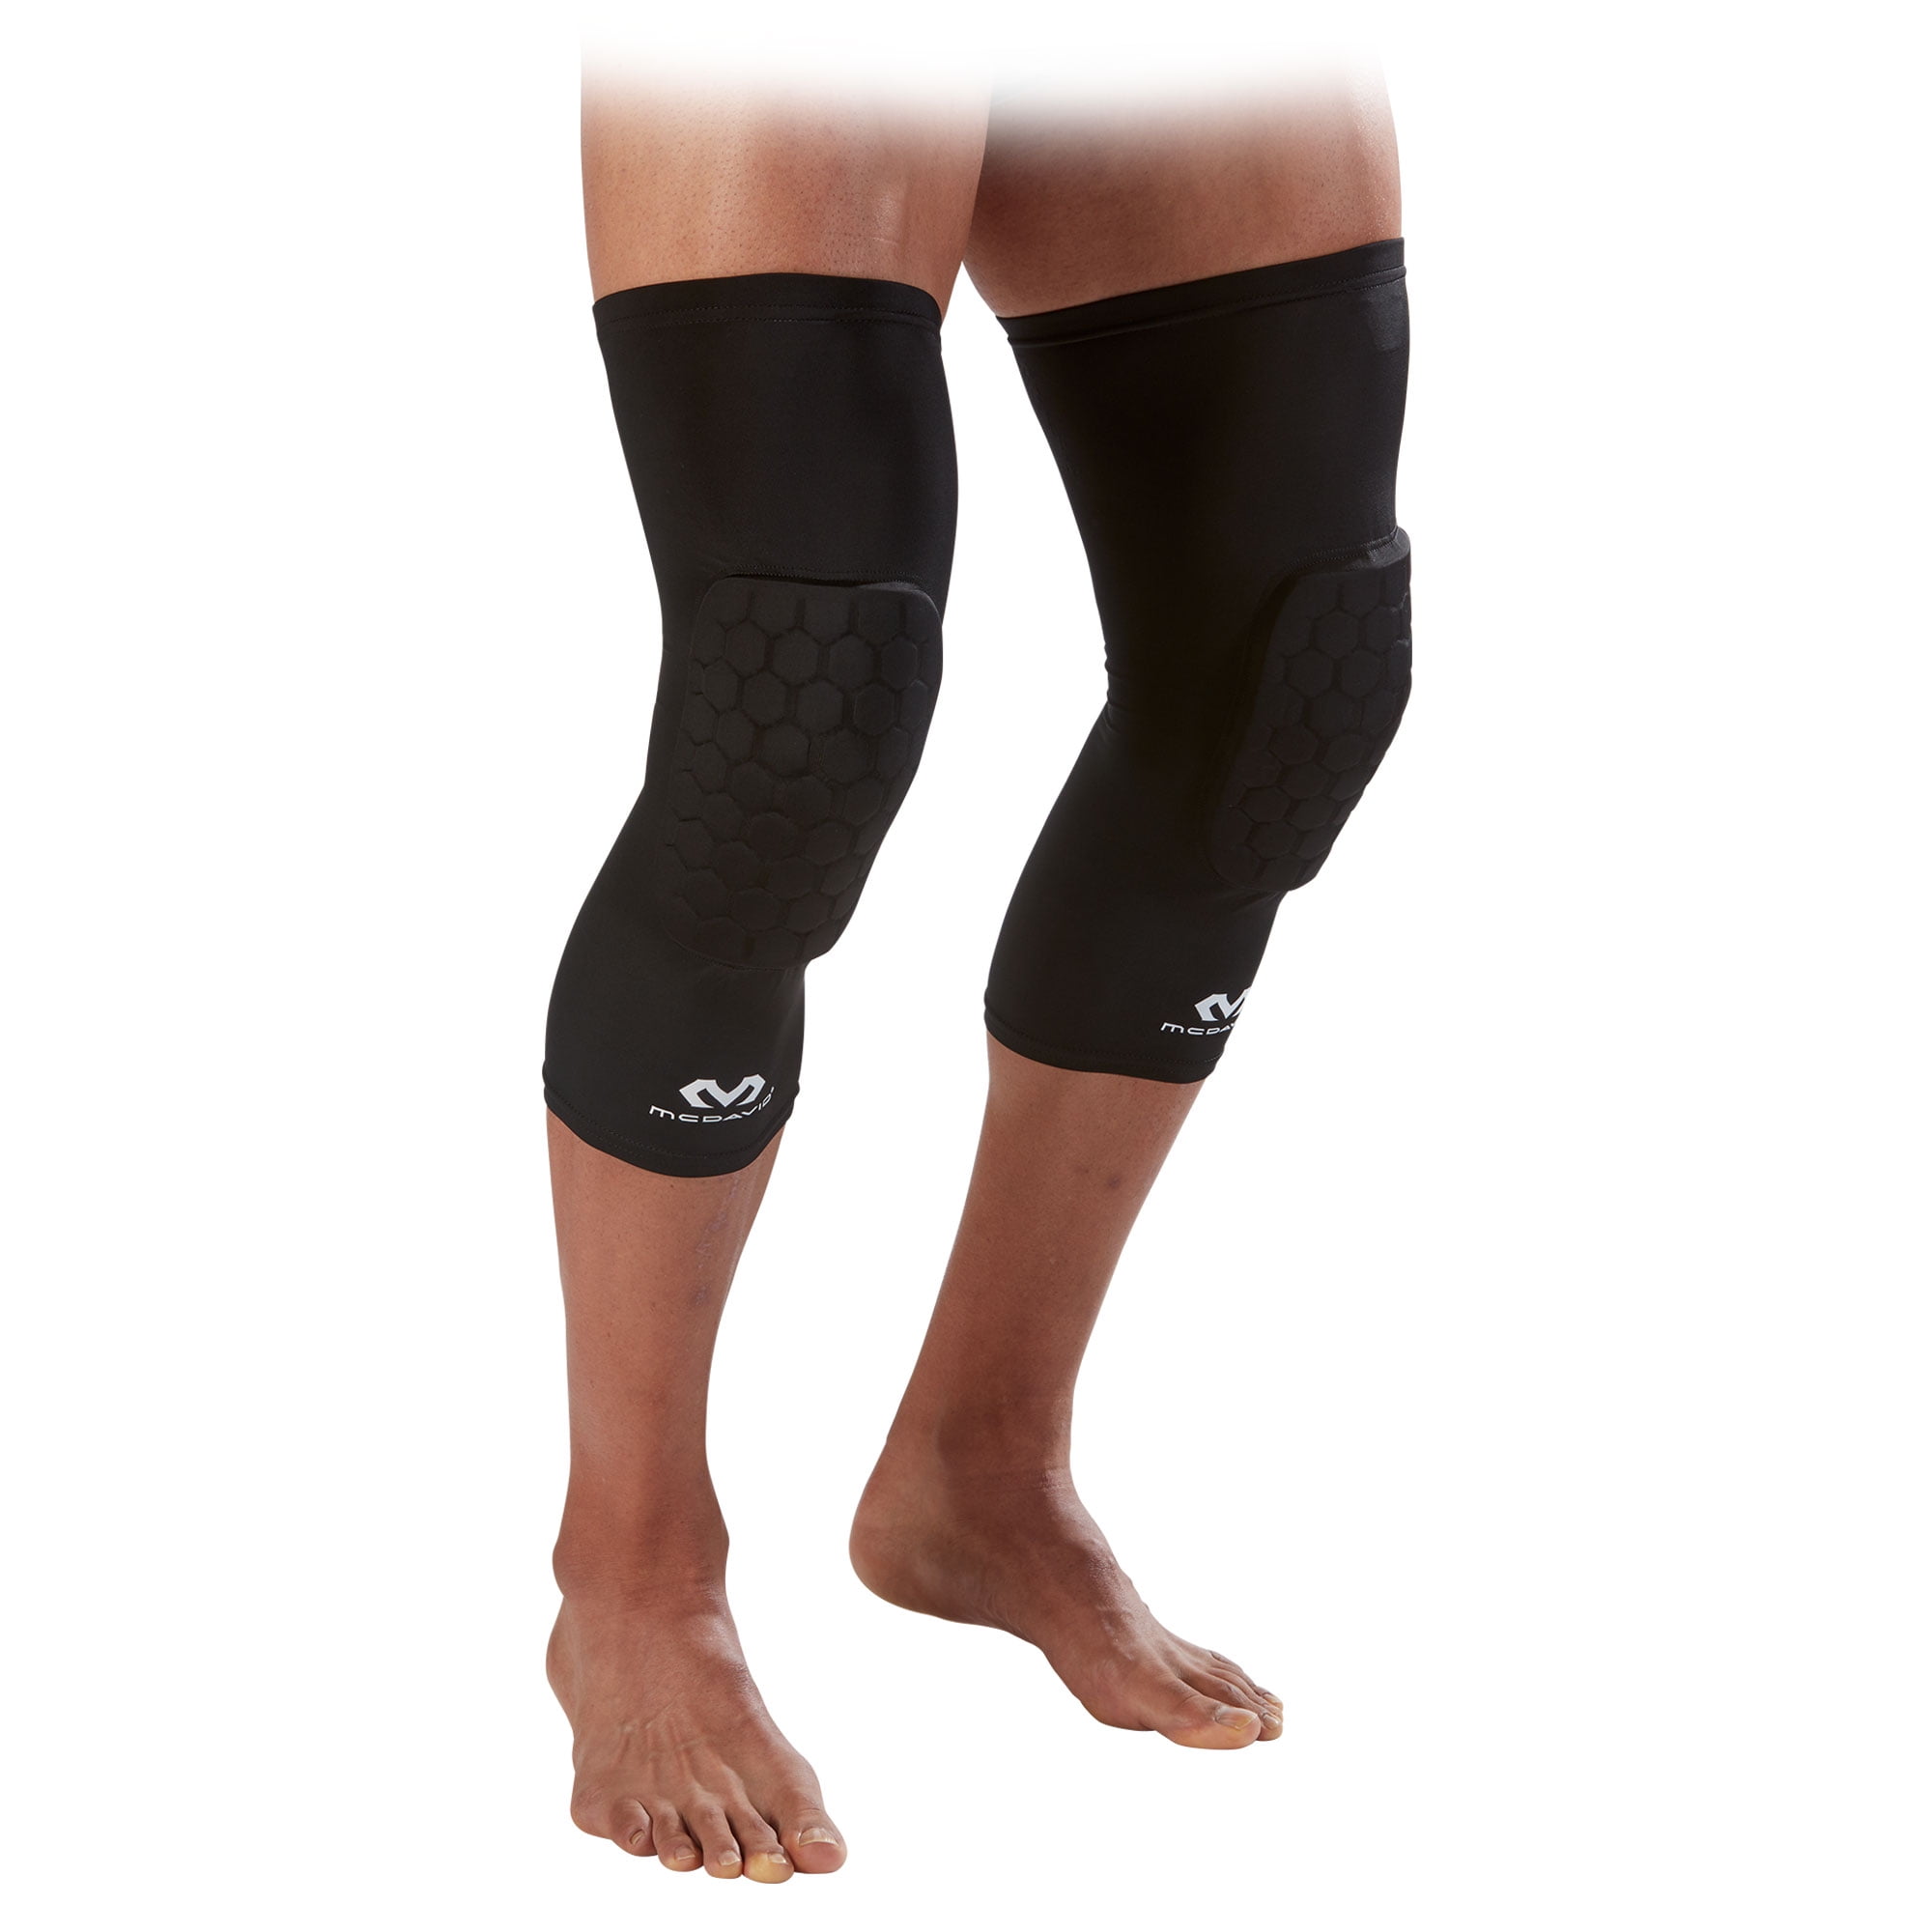 McDavid Knee HEX Tech Black Padded Protective Compression Sleeve